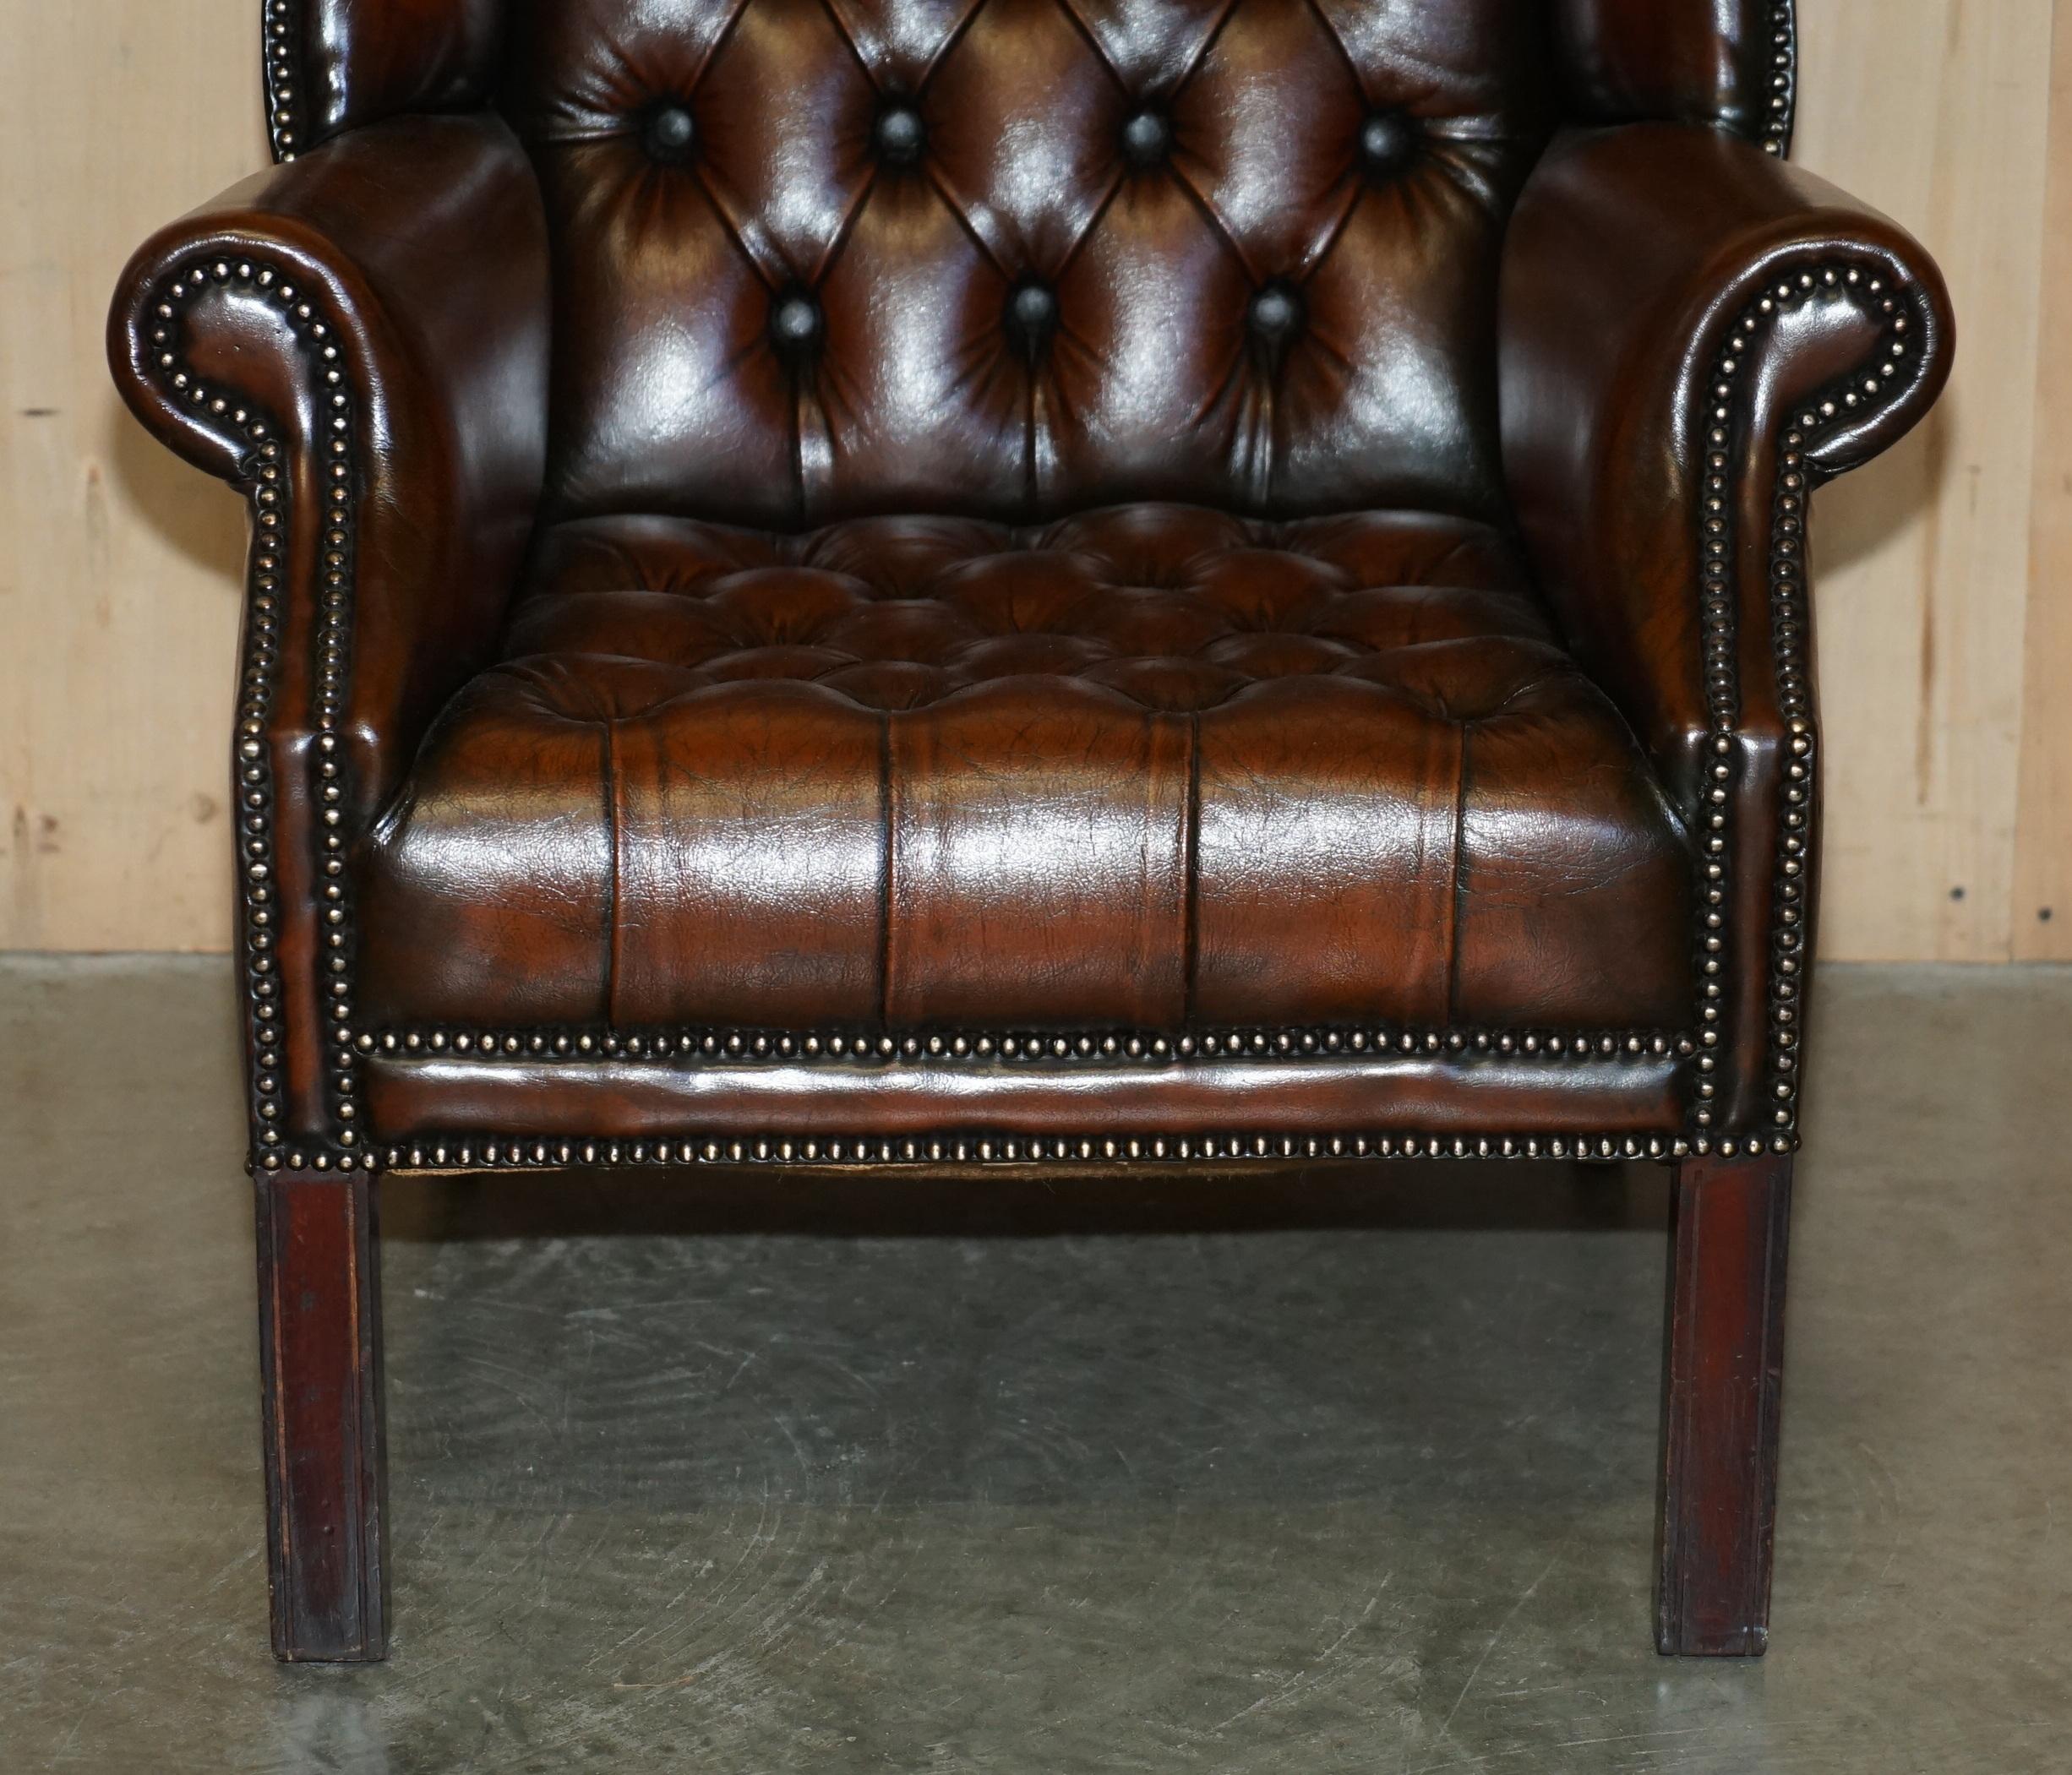 DECORATIVE ViNTAGE RESTORED BROWN LEATHER TUFTED CHESTERFIELD WINGBACK ARMCHAIR 4